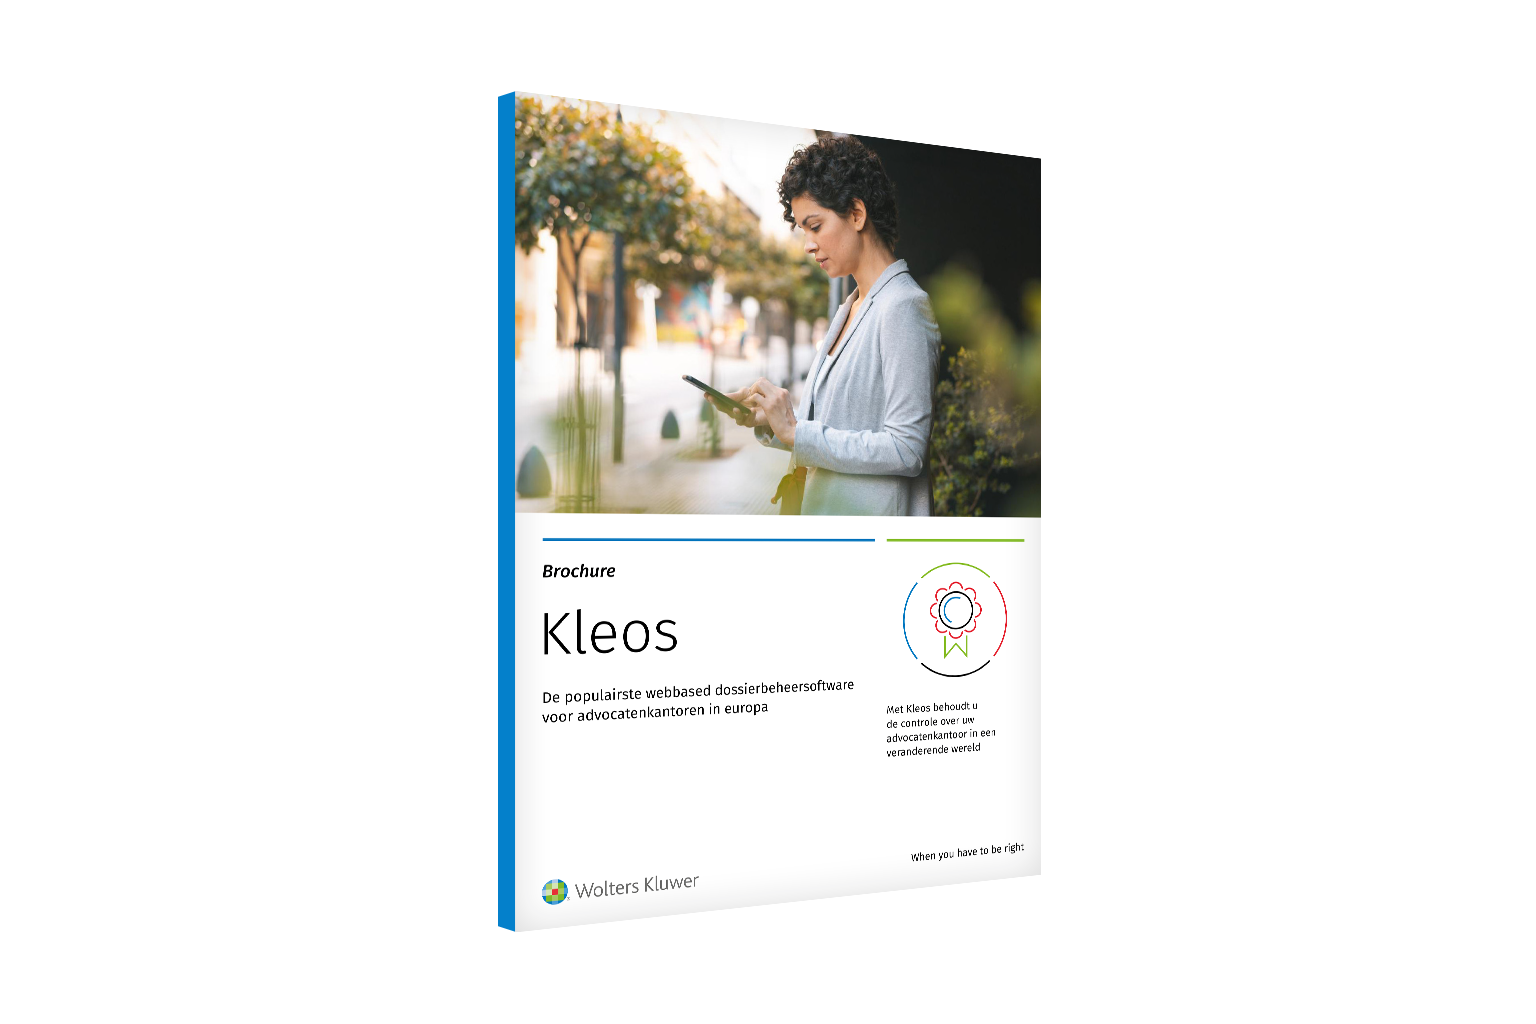 WK_Kleos_Brochure_NL-NL_cover_1536x1024.png